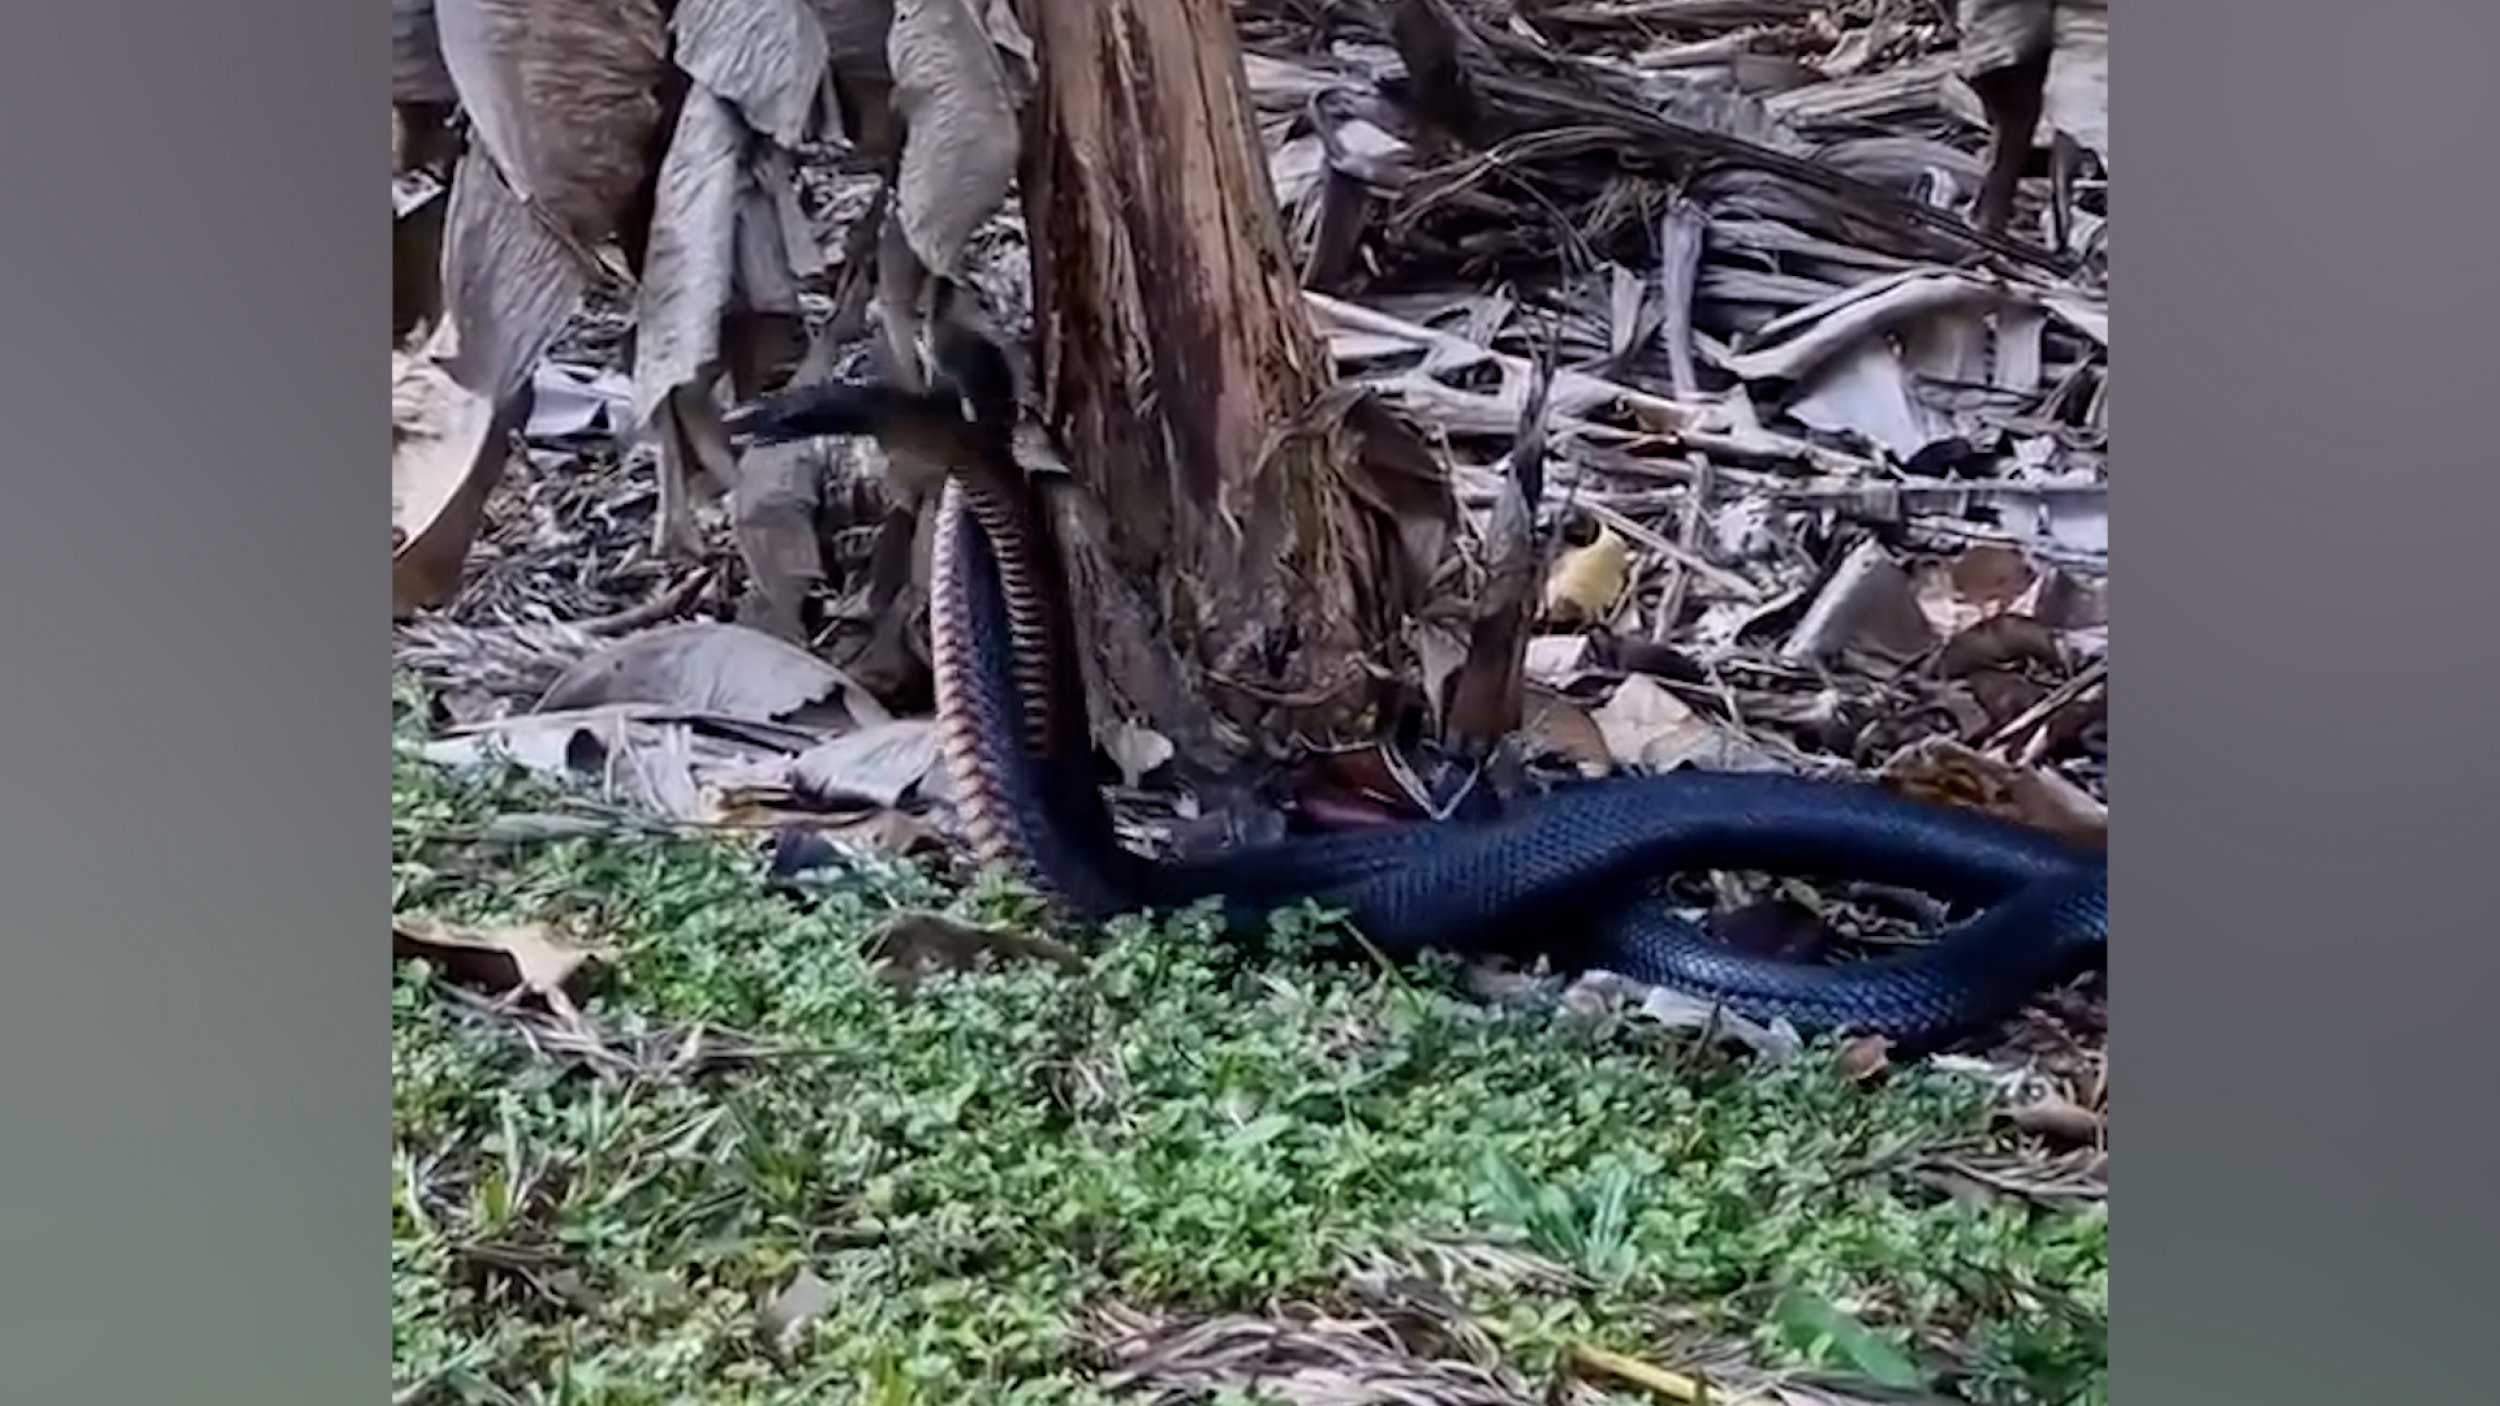 Watch Two Black Snakes Fight In Battle Over A Female